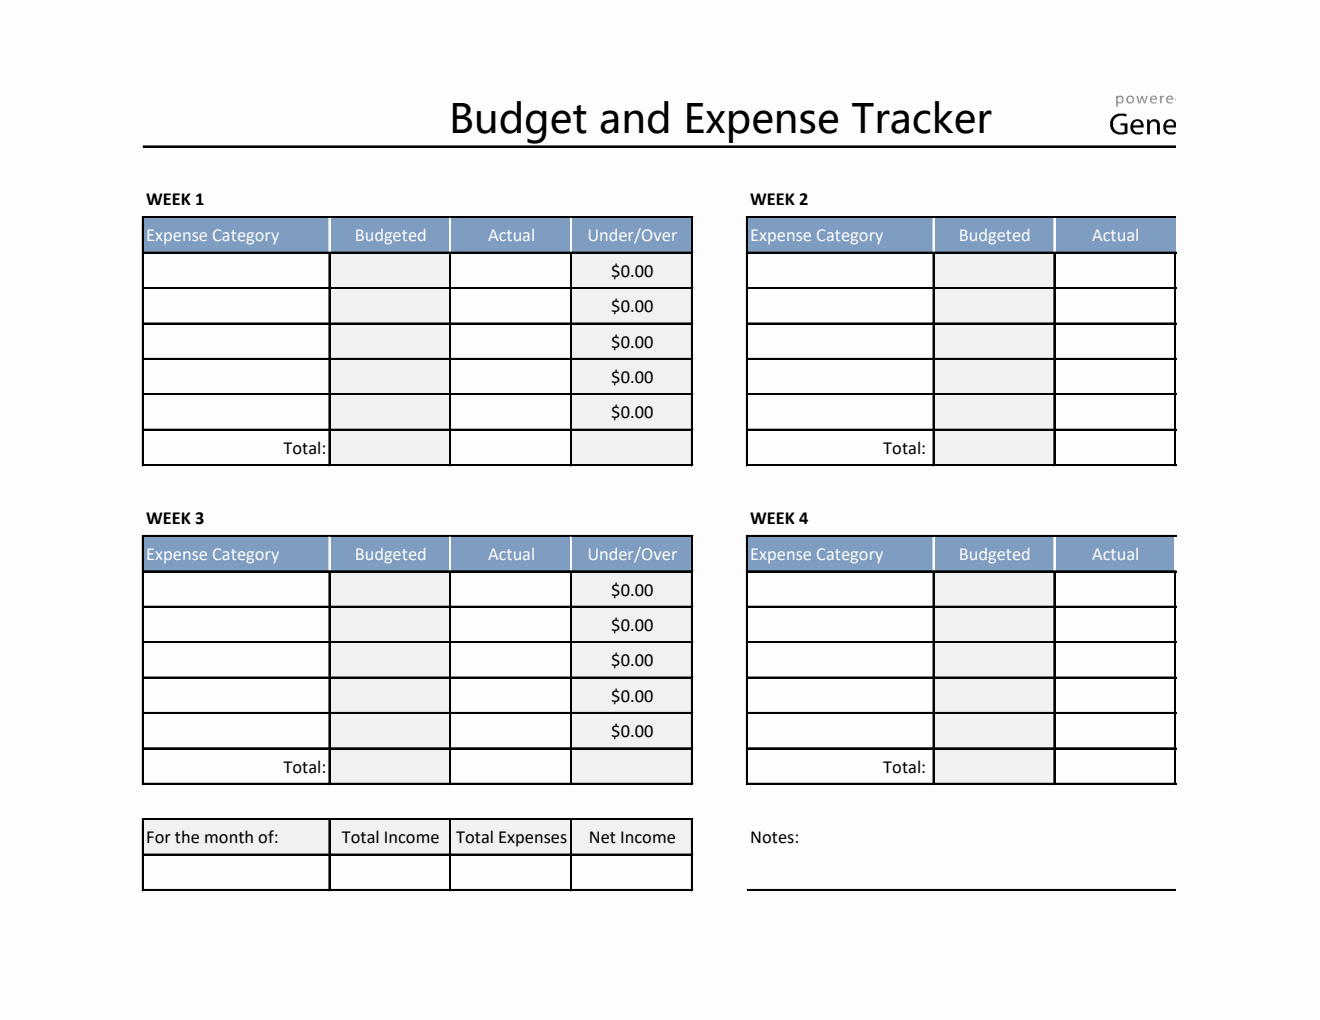 Budget and Expense Tracker in Excel (Simple)